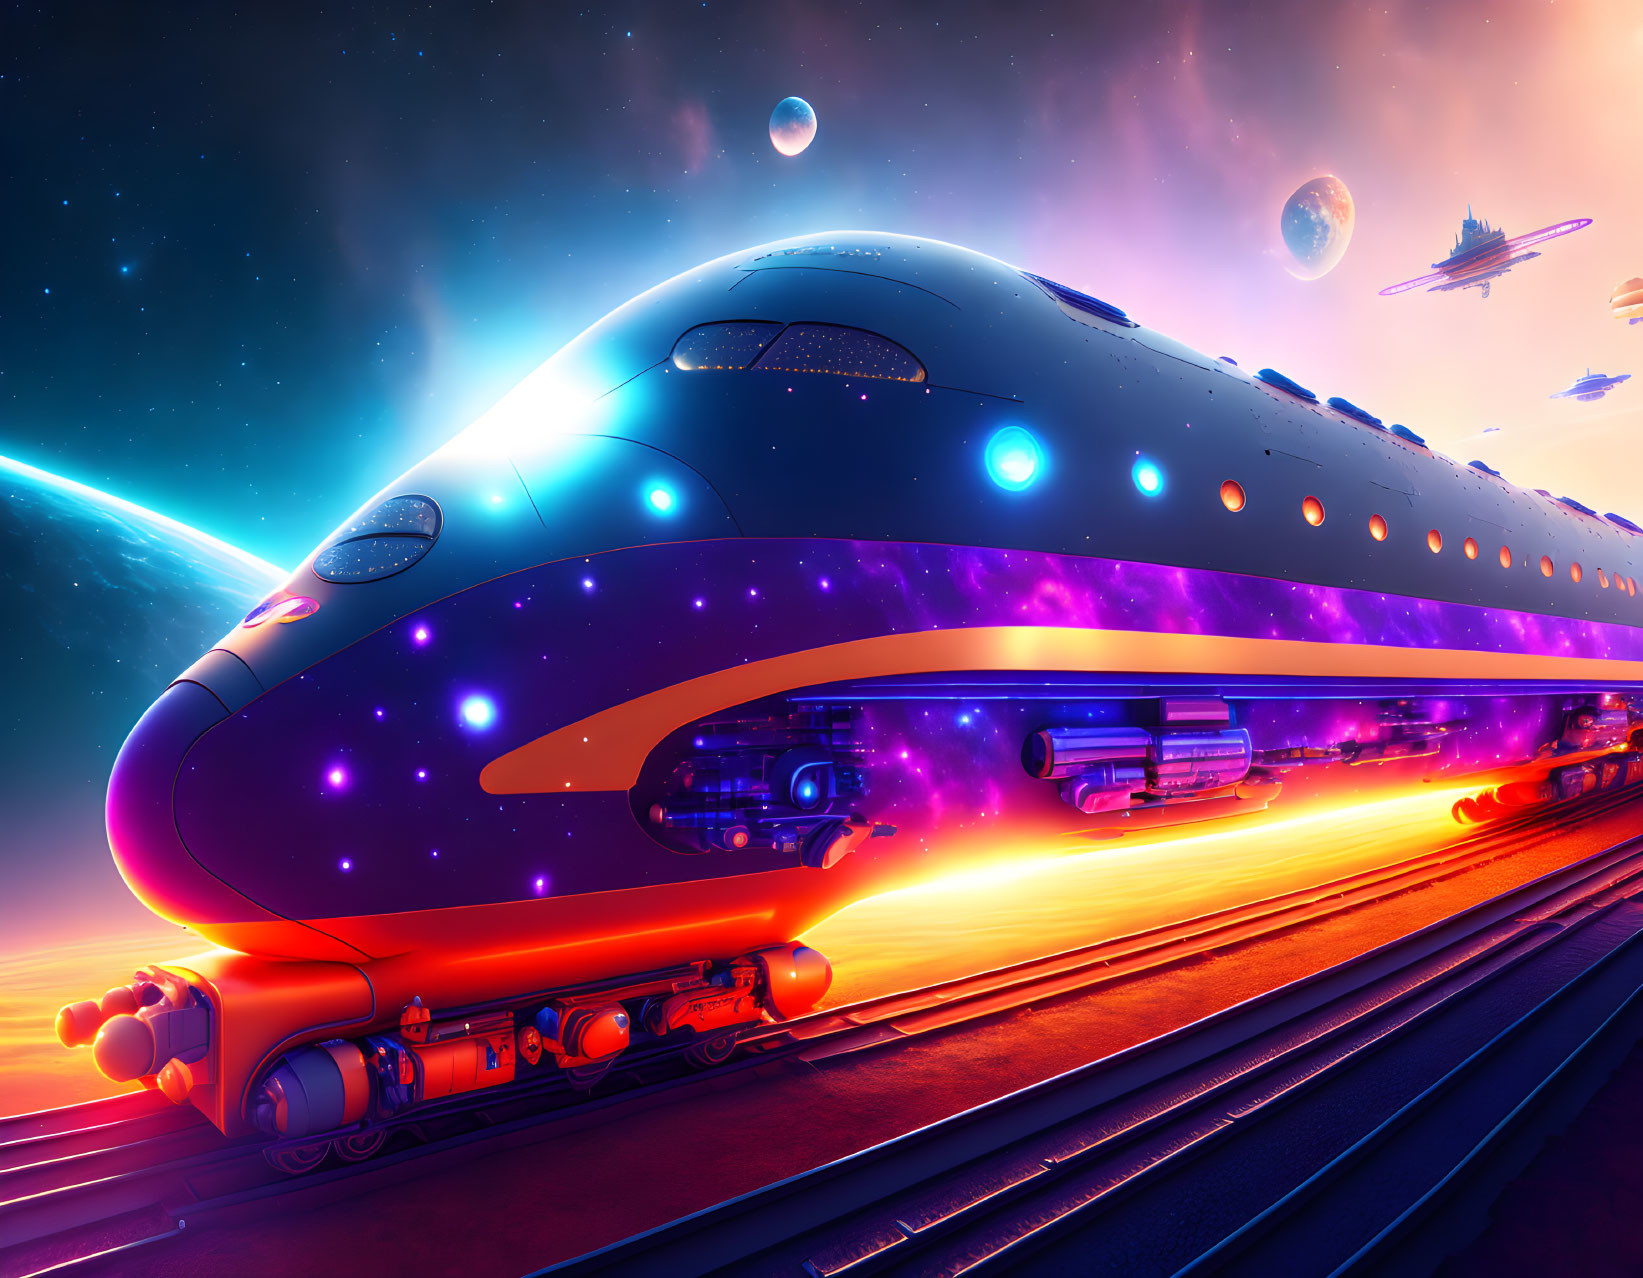 Futuristic train on neon-lit track under surreal sky with planets and spaceship